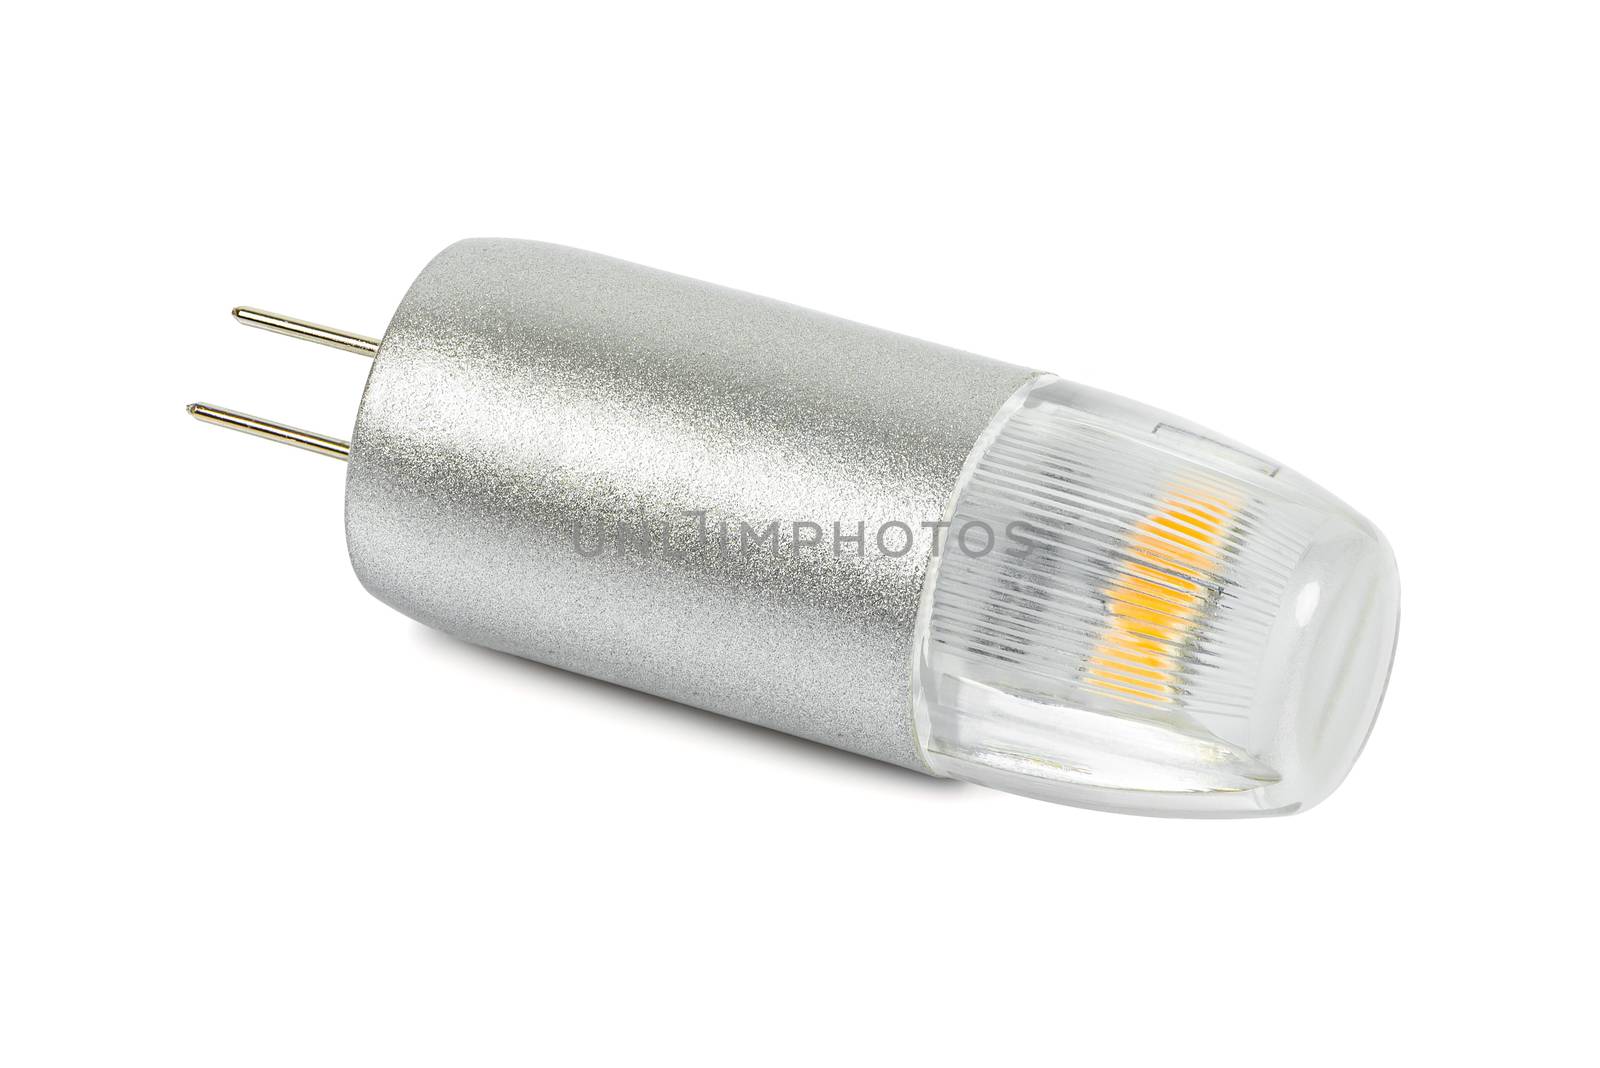 Modern G4 led bulb isolated on white background with clipping path